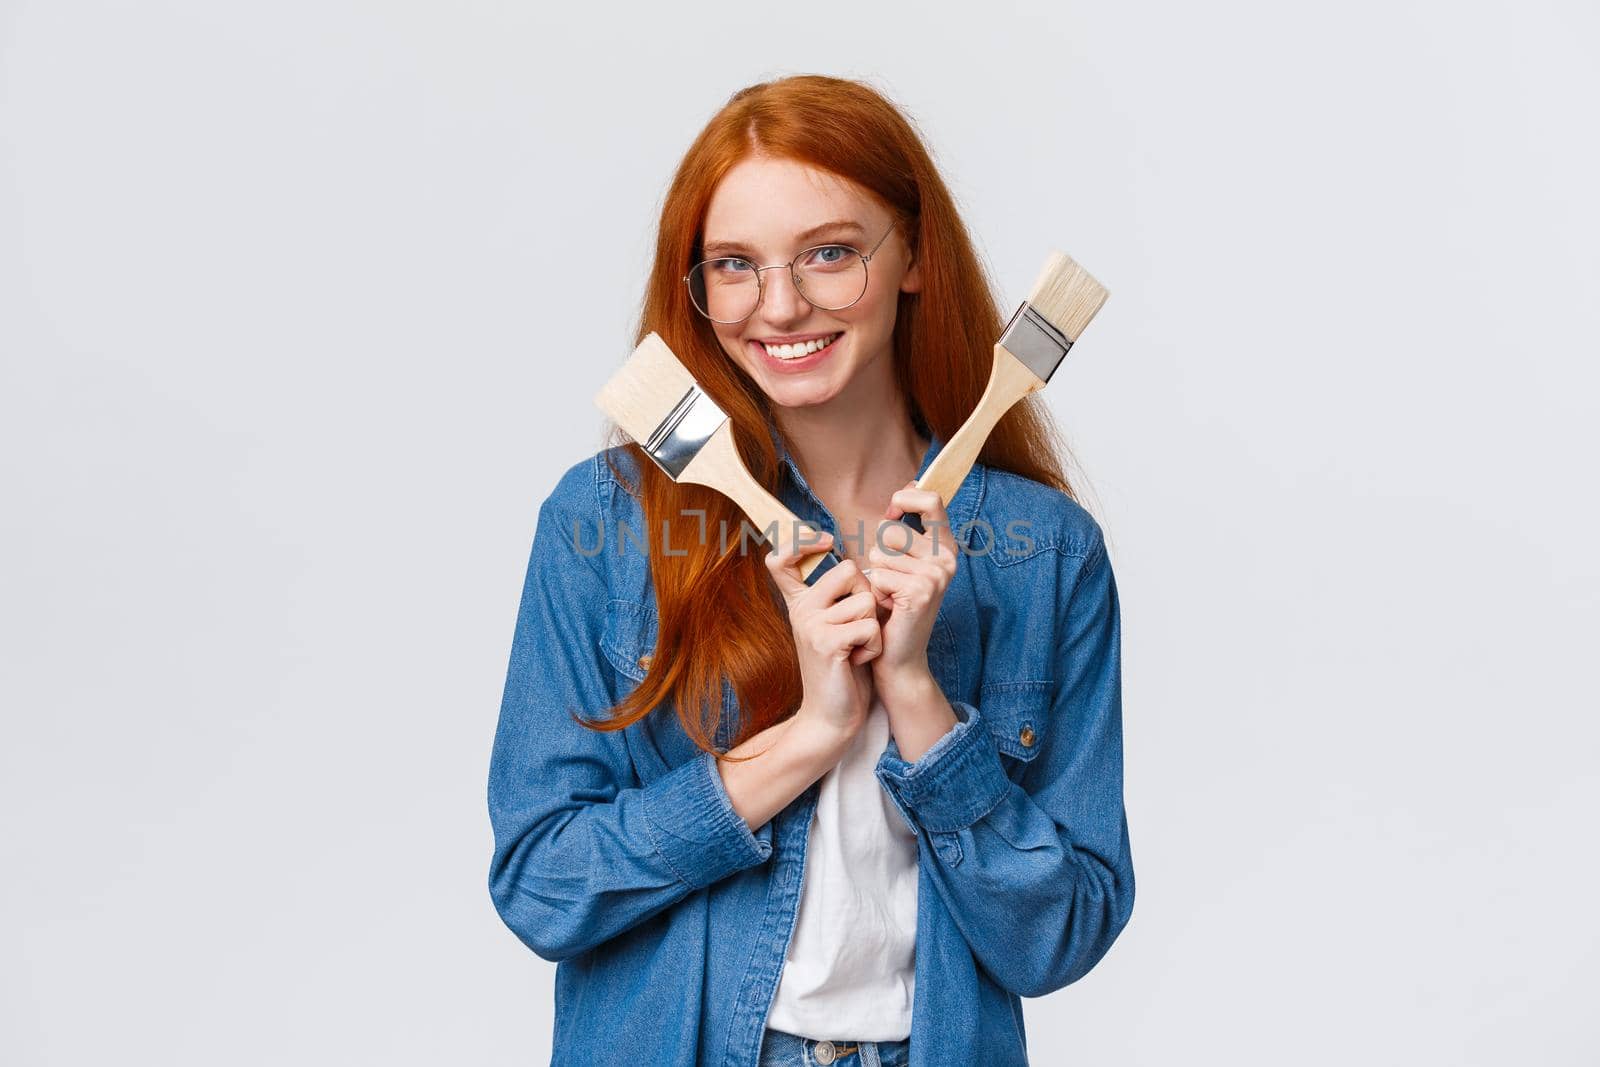 Dreamy and creative, joyful good-looking female designer, artist in glasses with red hair, holding two paintbrushes and smiling, plan repairment works, moving new house, white background.